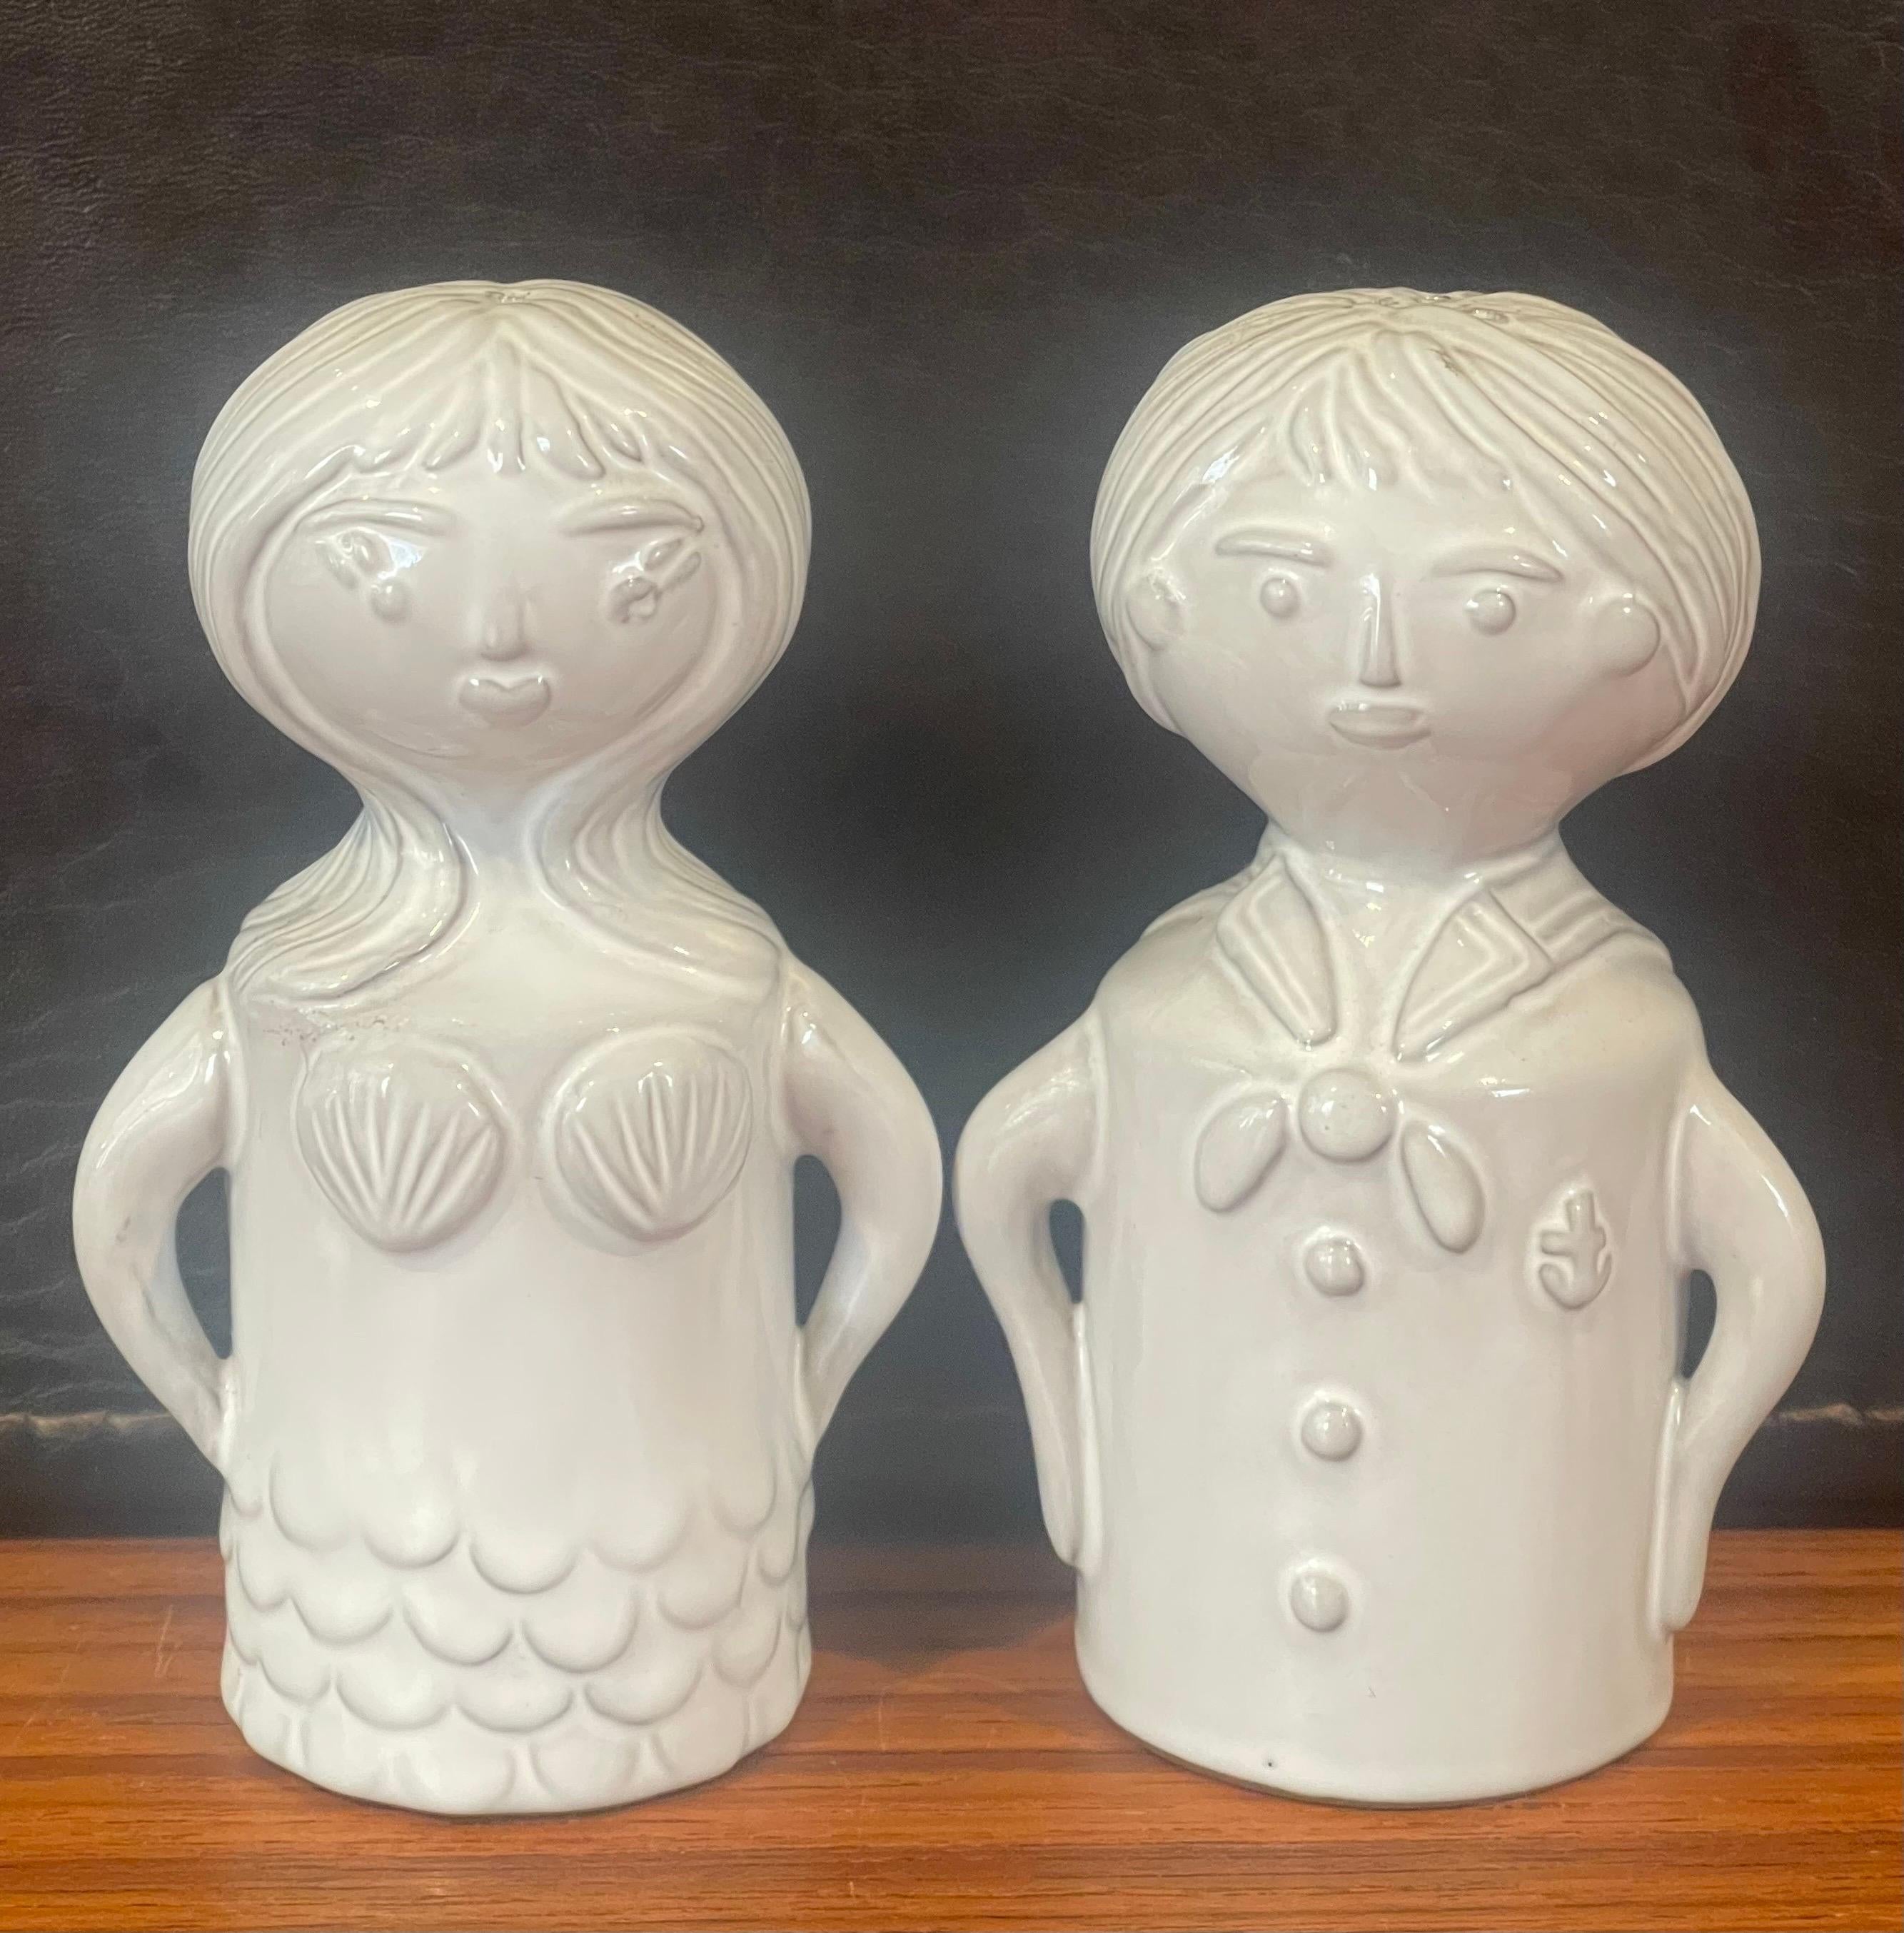 Whimsical pair of sailor and siren ceramic salt and pepper shakers by Jonathan Adler, circa 2000s.  The set is in very good condition with no chips or cracks and measures 2.5